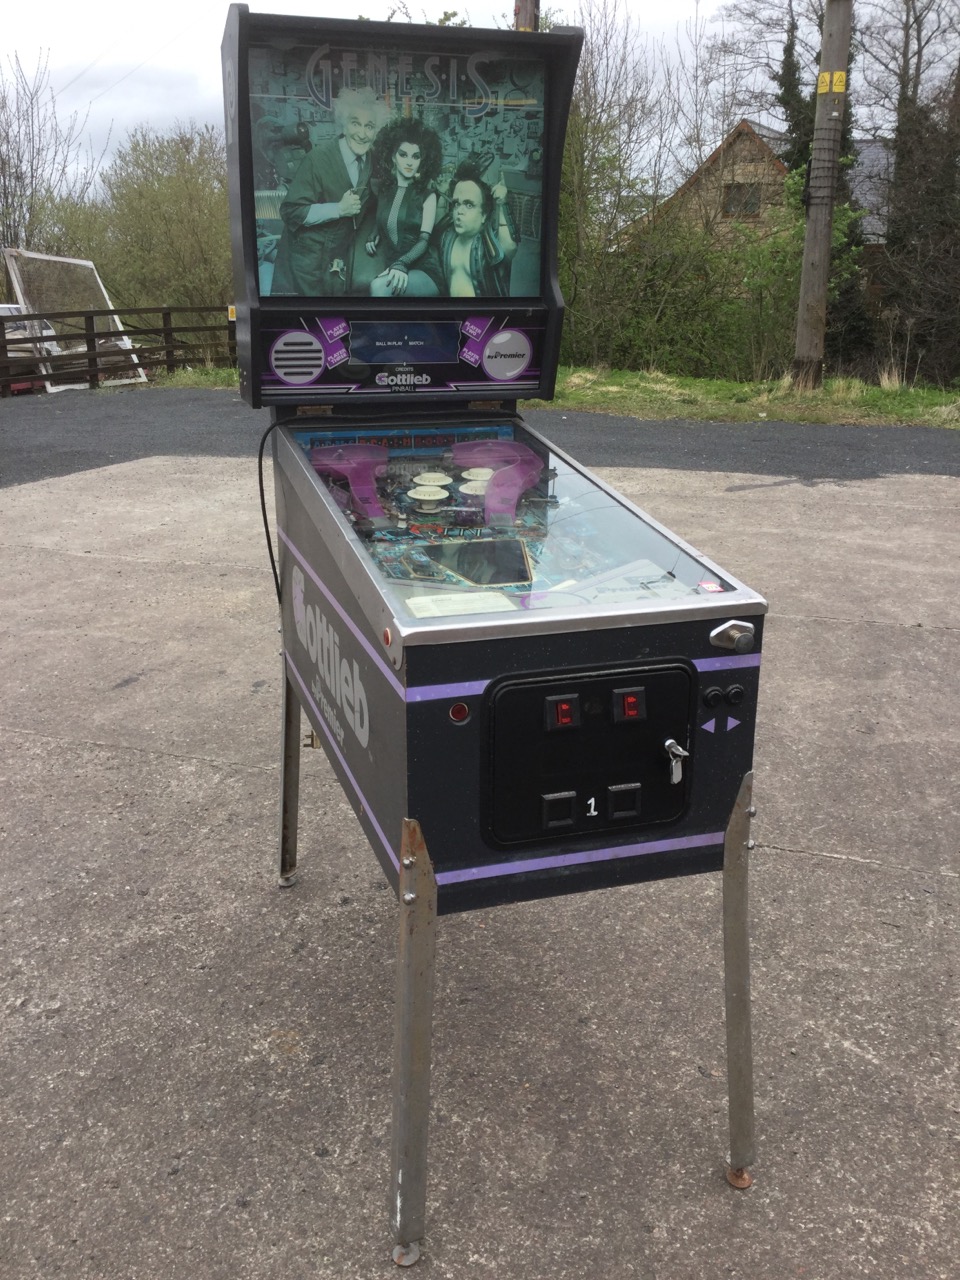 A 80s Cottlieb Premier Genesis pinball machine, with angled gaming board under glass